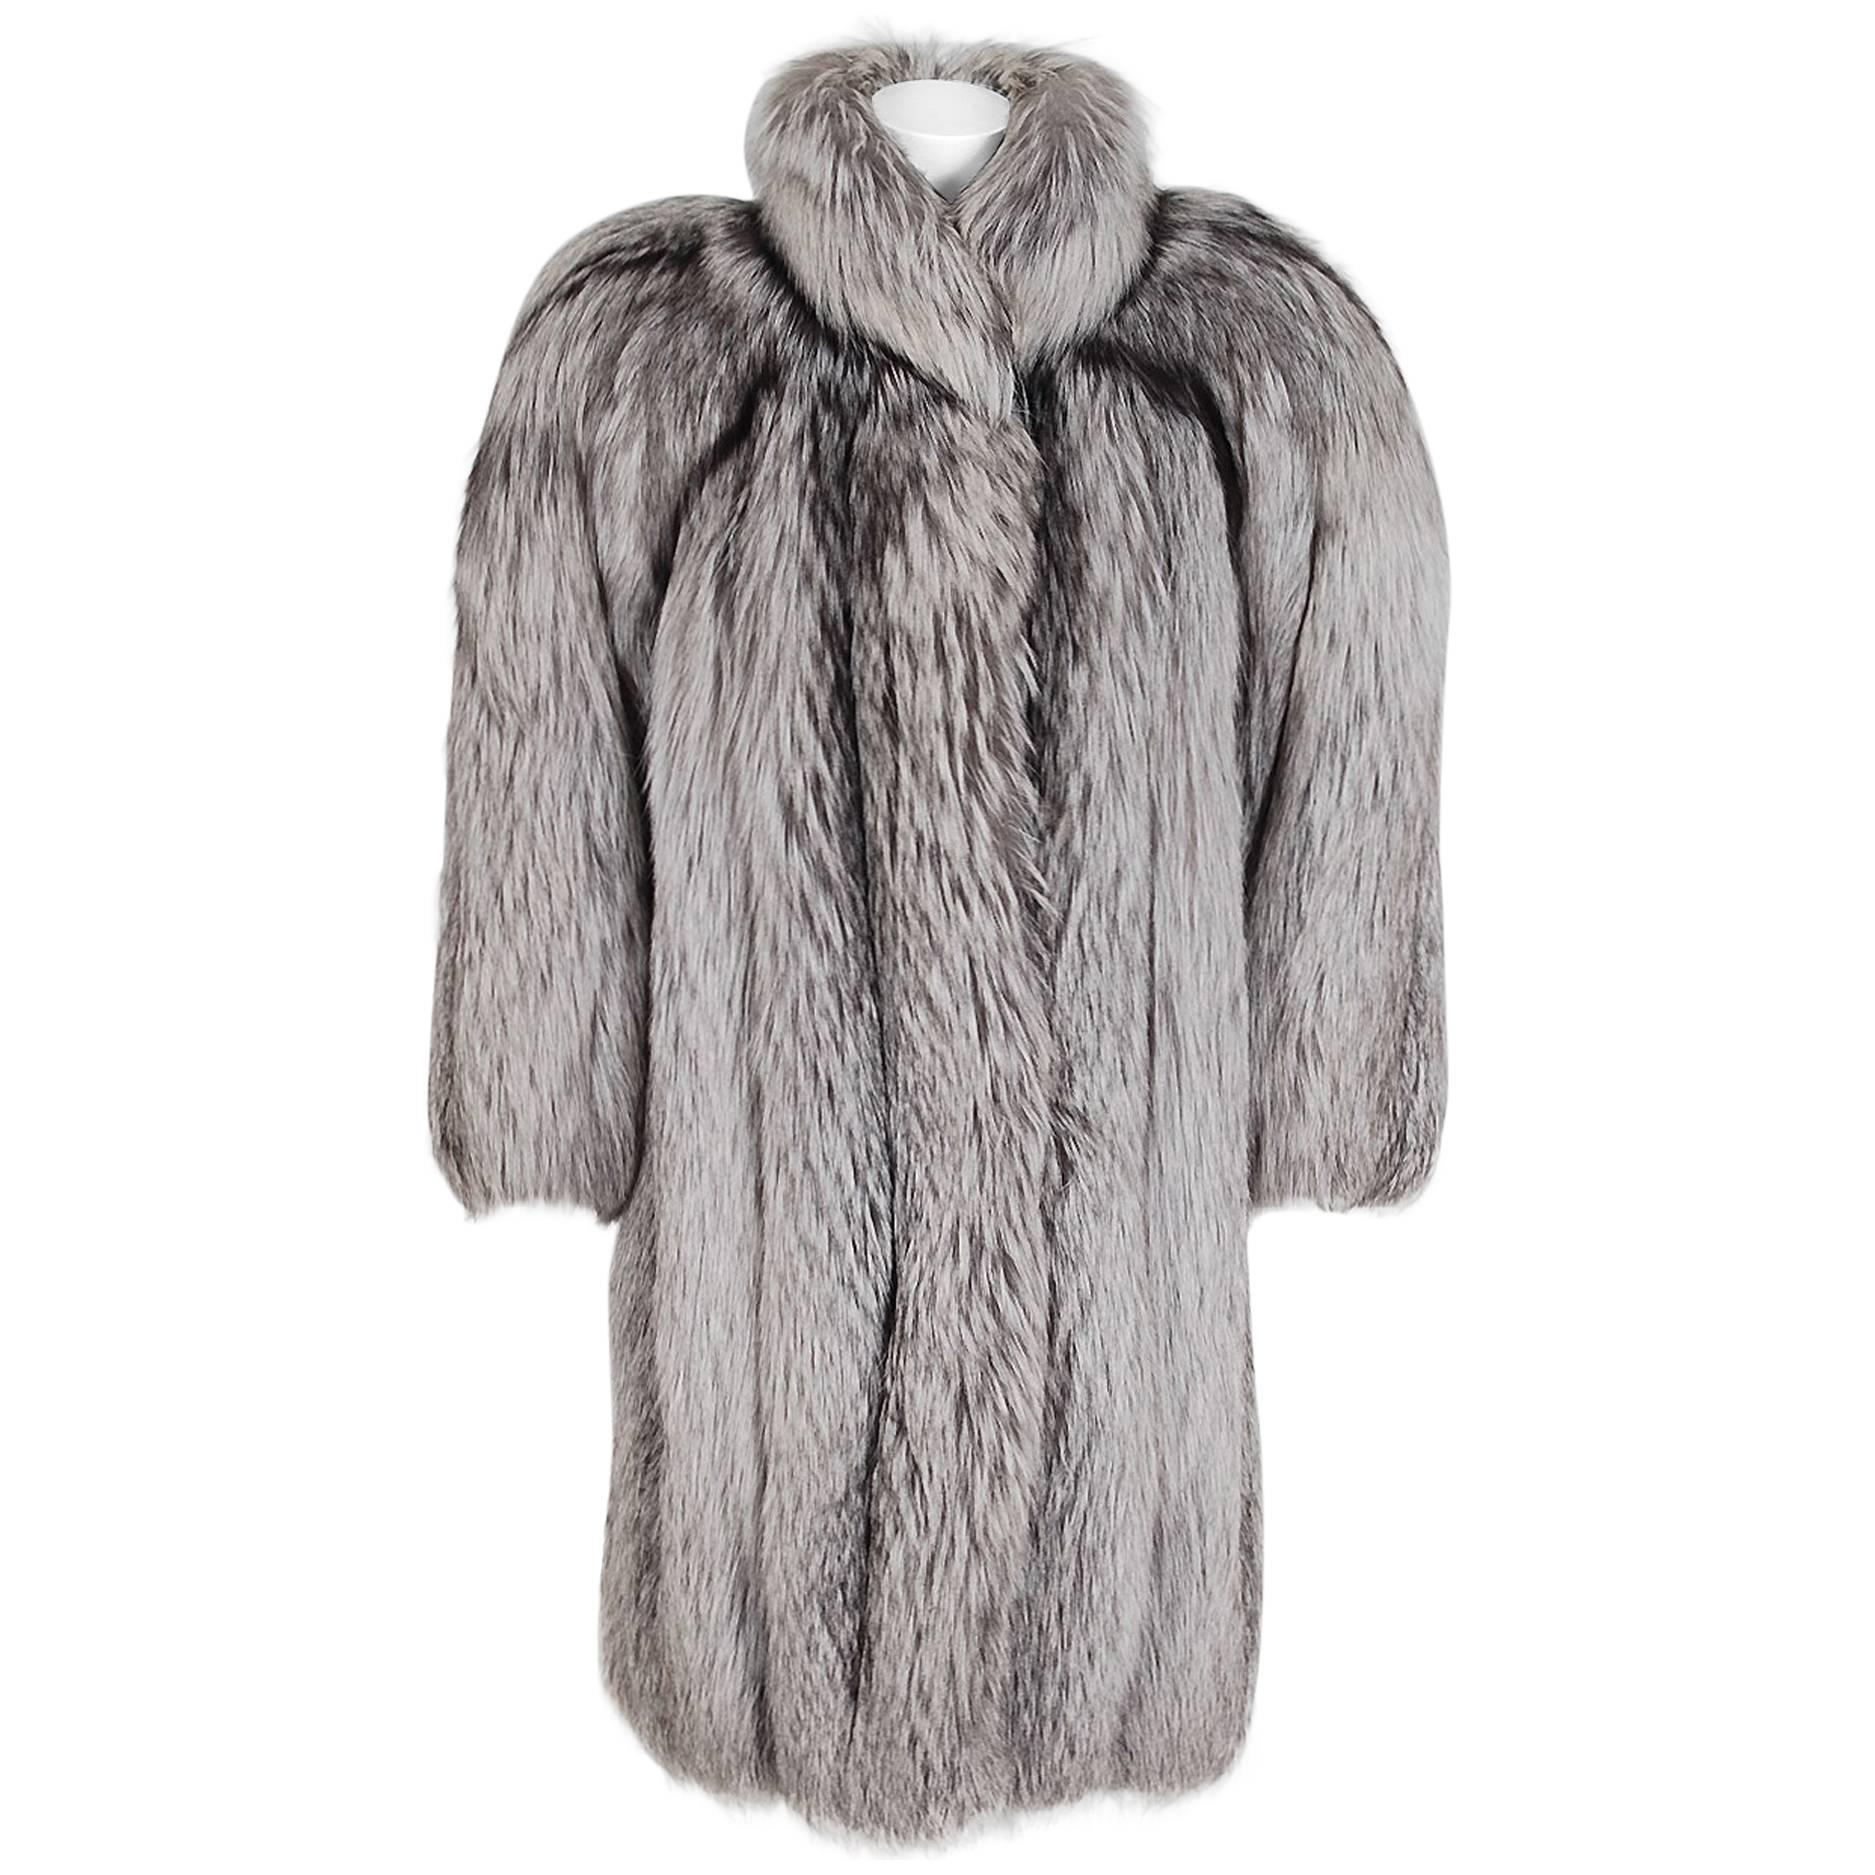 1971 Yves Saint Laurent Couture Dramatic Silver-Fox Fur Chubby Coat Jacket